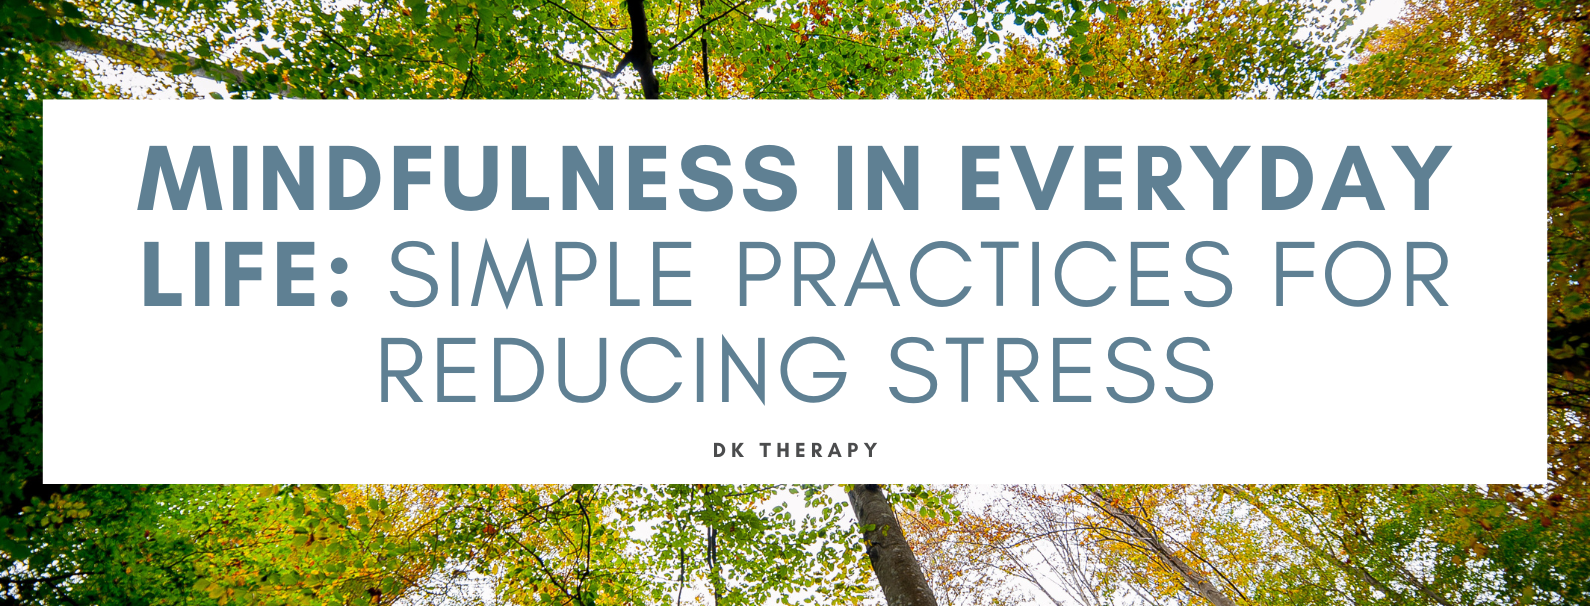 Mindfulness in Everyday Life_ Simple Practices for Reducing Stress